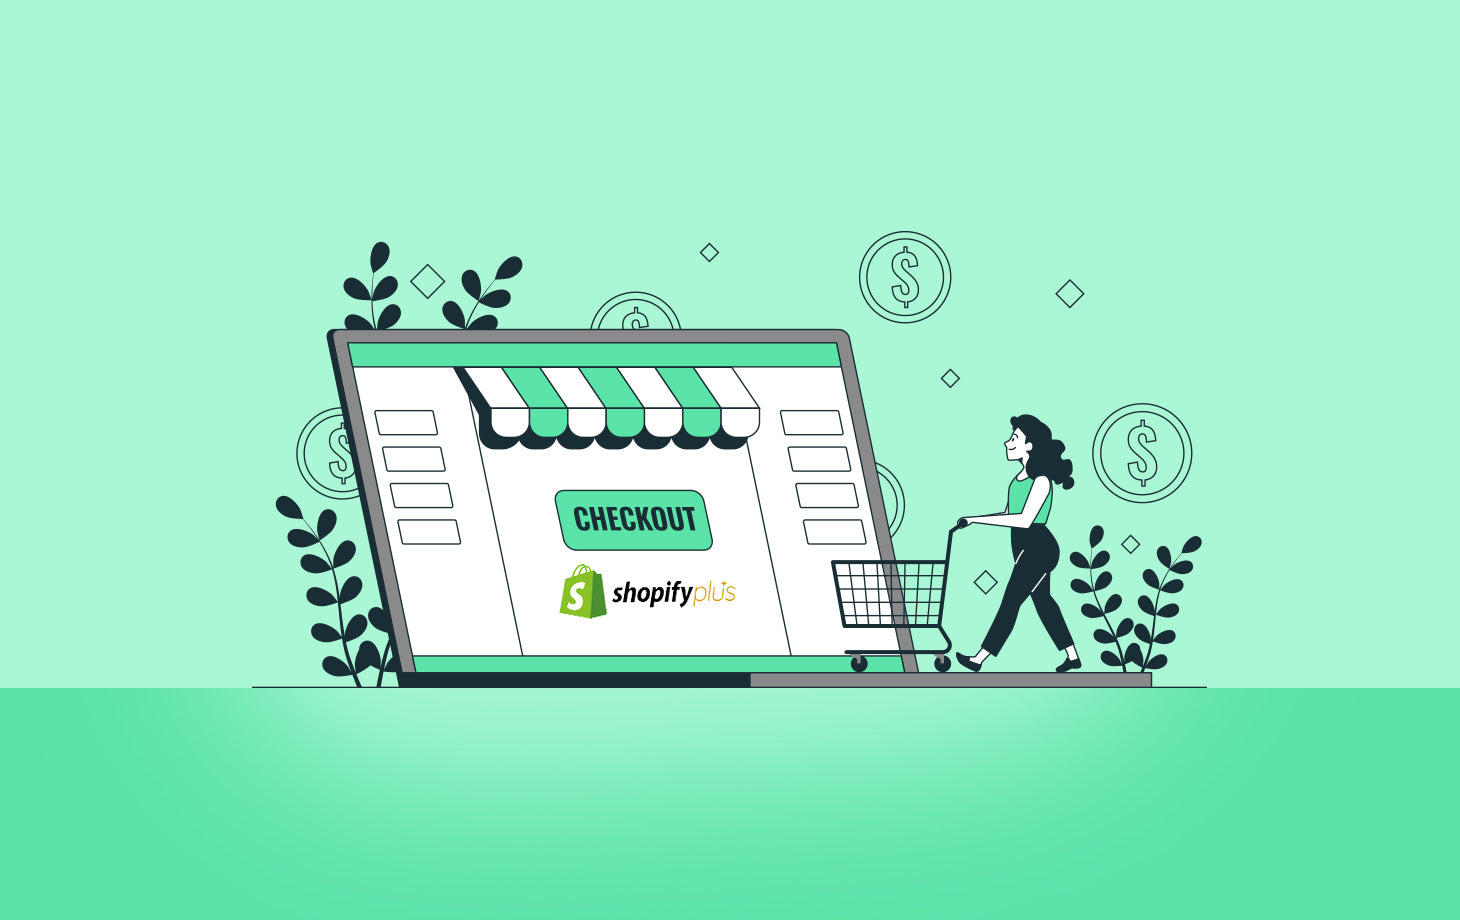 How To Customize Shopify Plus Checkout - Step By Step Guide - Customize your Shopify checkout page